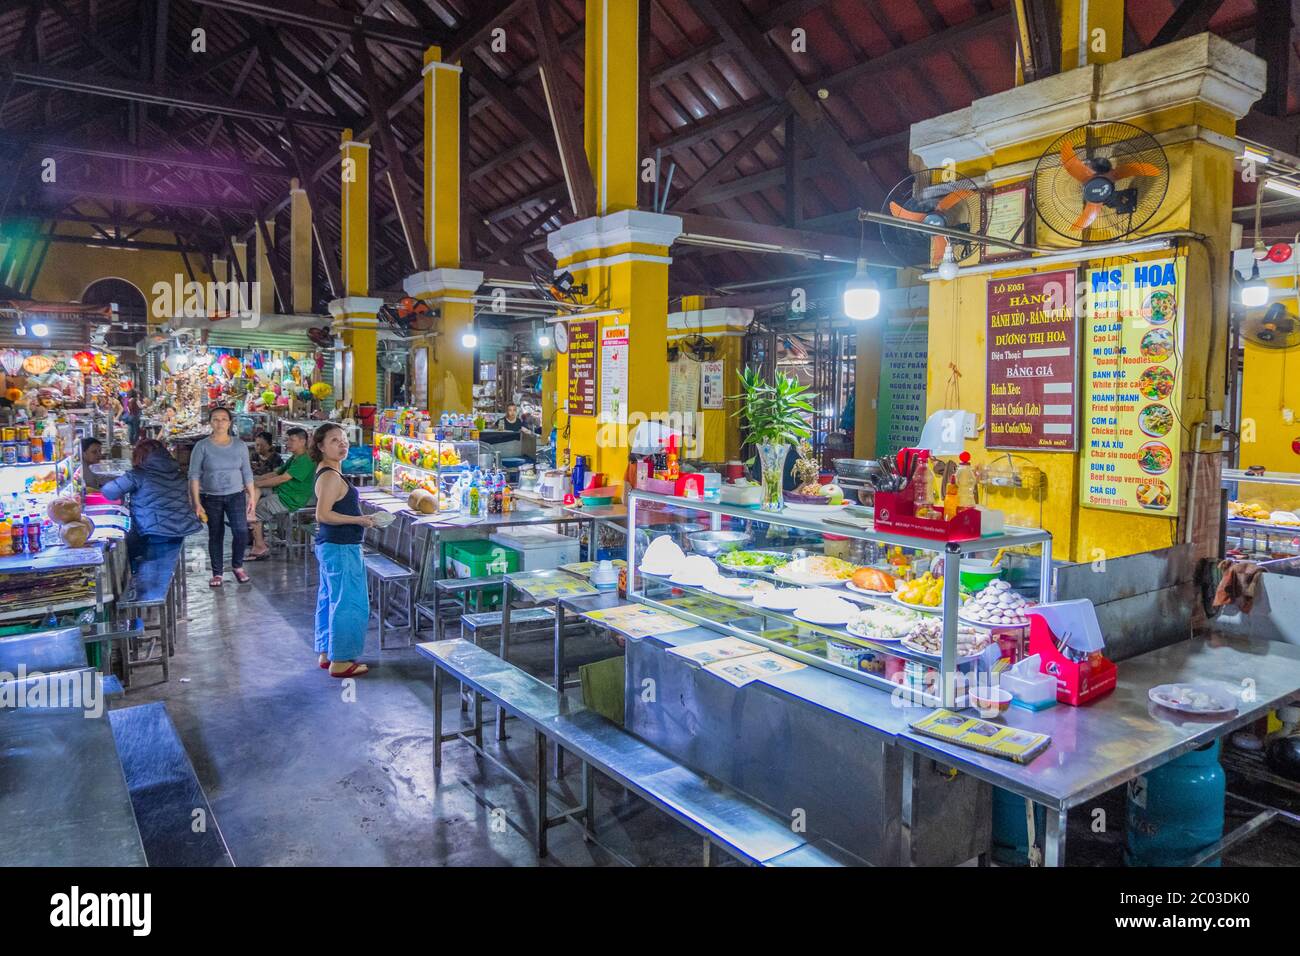 Food court, Cho Hoi An, Central market hall, old town, Hoi An, Vietnam, Asia Stock Photo